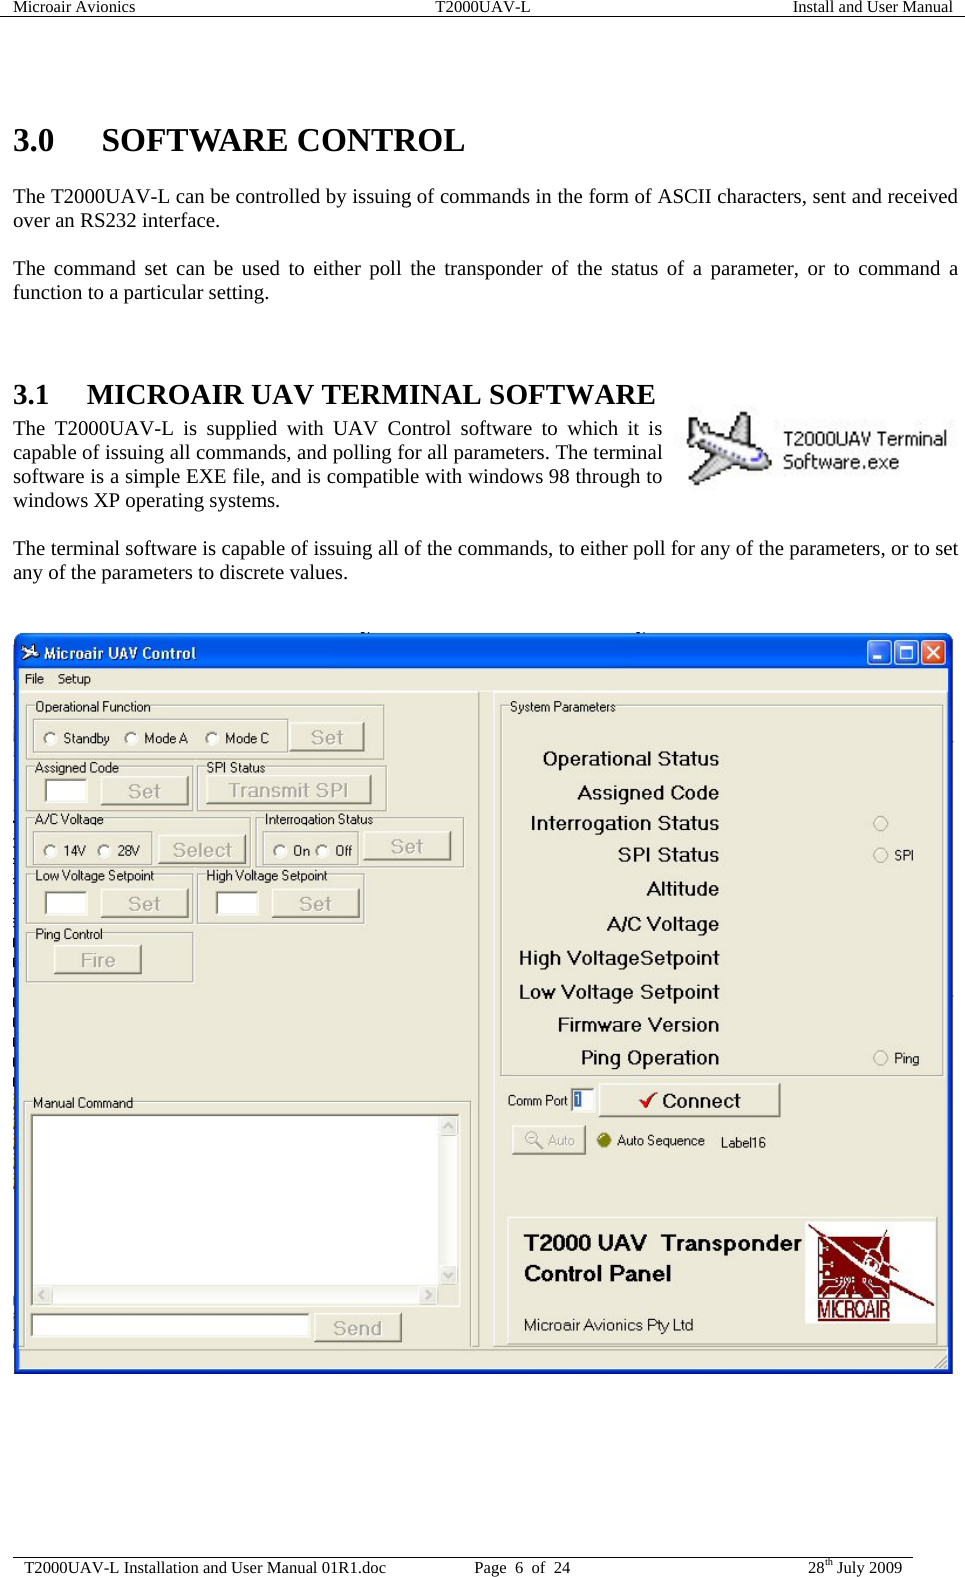 Microair Avionics  T2000UAV-L  Install and User Manual  T2000UAV-L Installation and User Manual 01R1.doc  Page  6  of  24  28th July 2009   3.0 SOFTWARE CONTROL The T2000UAV-L can be controlled by issuing of commands in the form of ASCII characters, sent and received over an RS232 interface.  The command set can be used to either poll the transponder of the status of a parameter, or to command a function to a particular setting.   3.1 MICROAIR UAV TERMINAL SOFTWARE The T2000UAV-L is supplied with UAV Control software to which it is capable of issuing all commands, and polling for all parameters. The terminal software is a simple EXE file, and is compatible with windows 98 through to windows XP operating systems.  The terminal software is capable of issuing all of the commands, to either poll for any of the parameters, or to set any of the parameters to discrete values.     